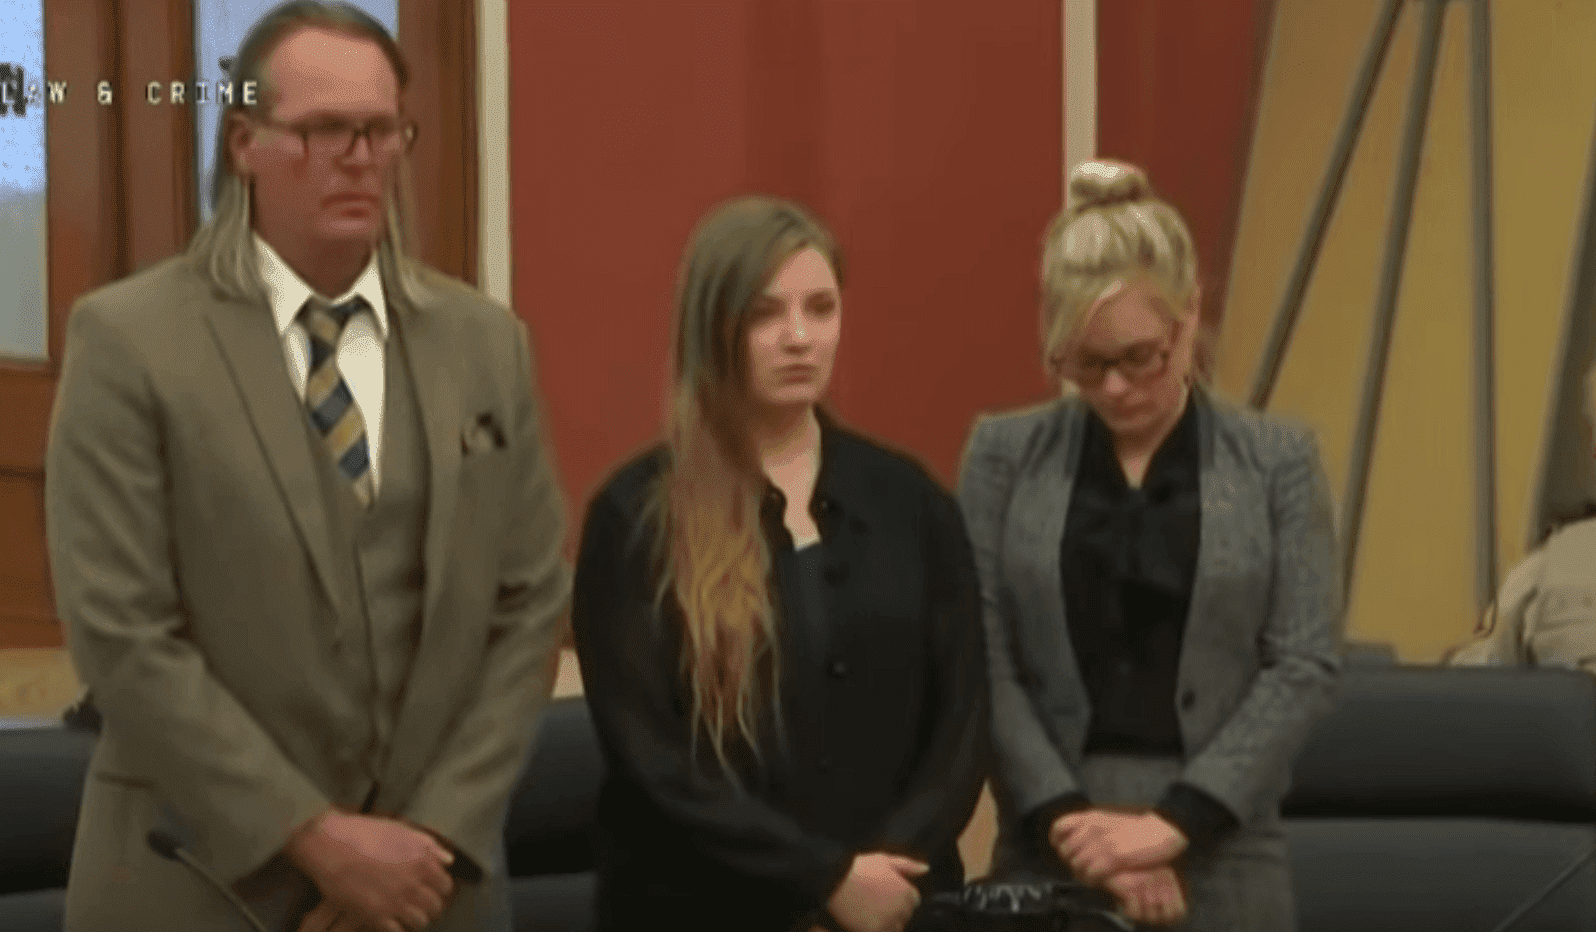 Cheyanne Harris and her lawyers listen to the jury's verdict | Photo: YouTube/Law & Crime Network